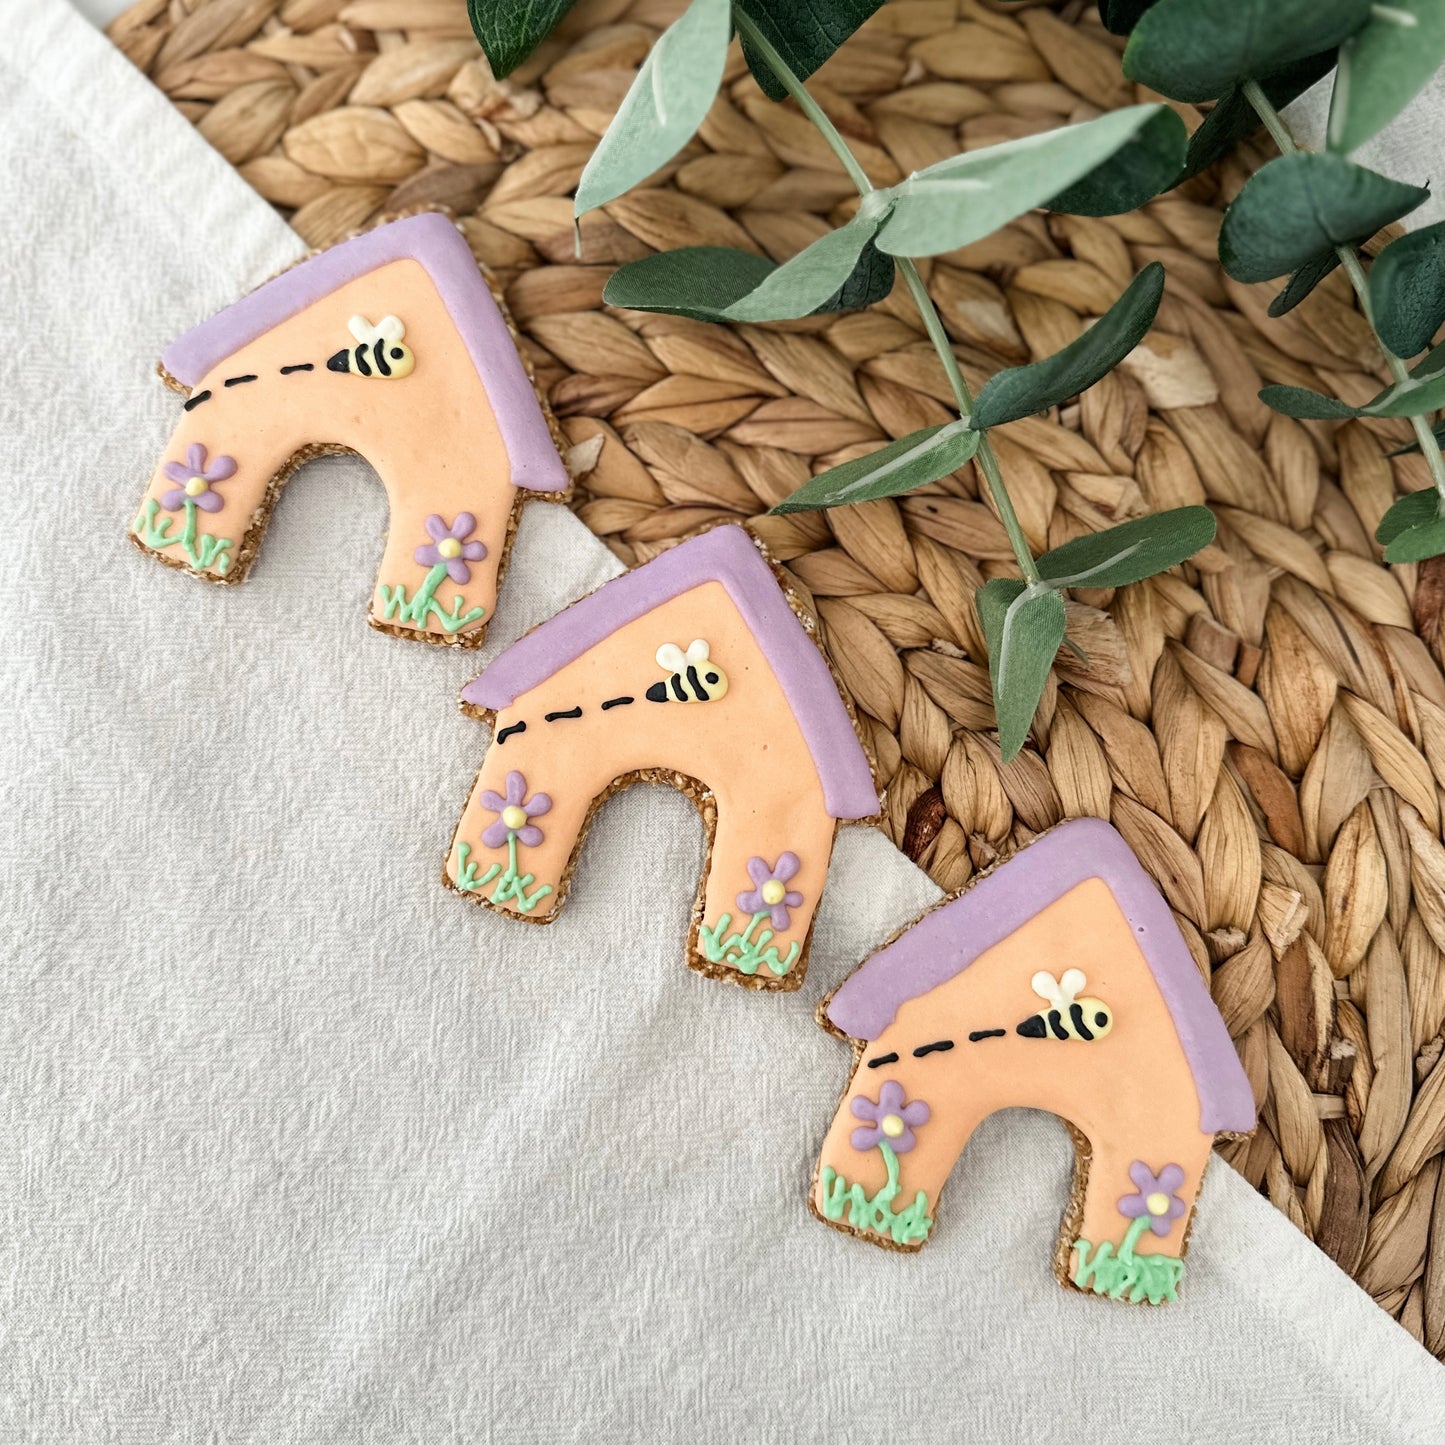 “Spring Dog House” Cookie